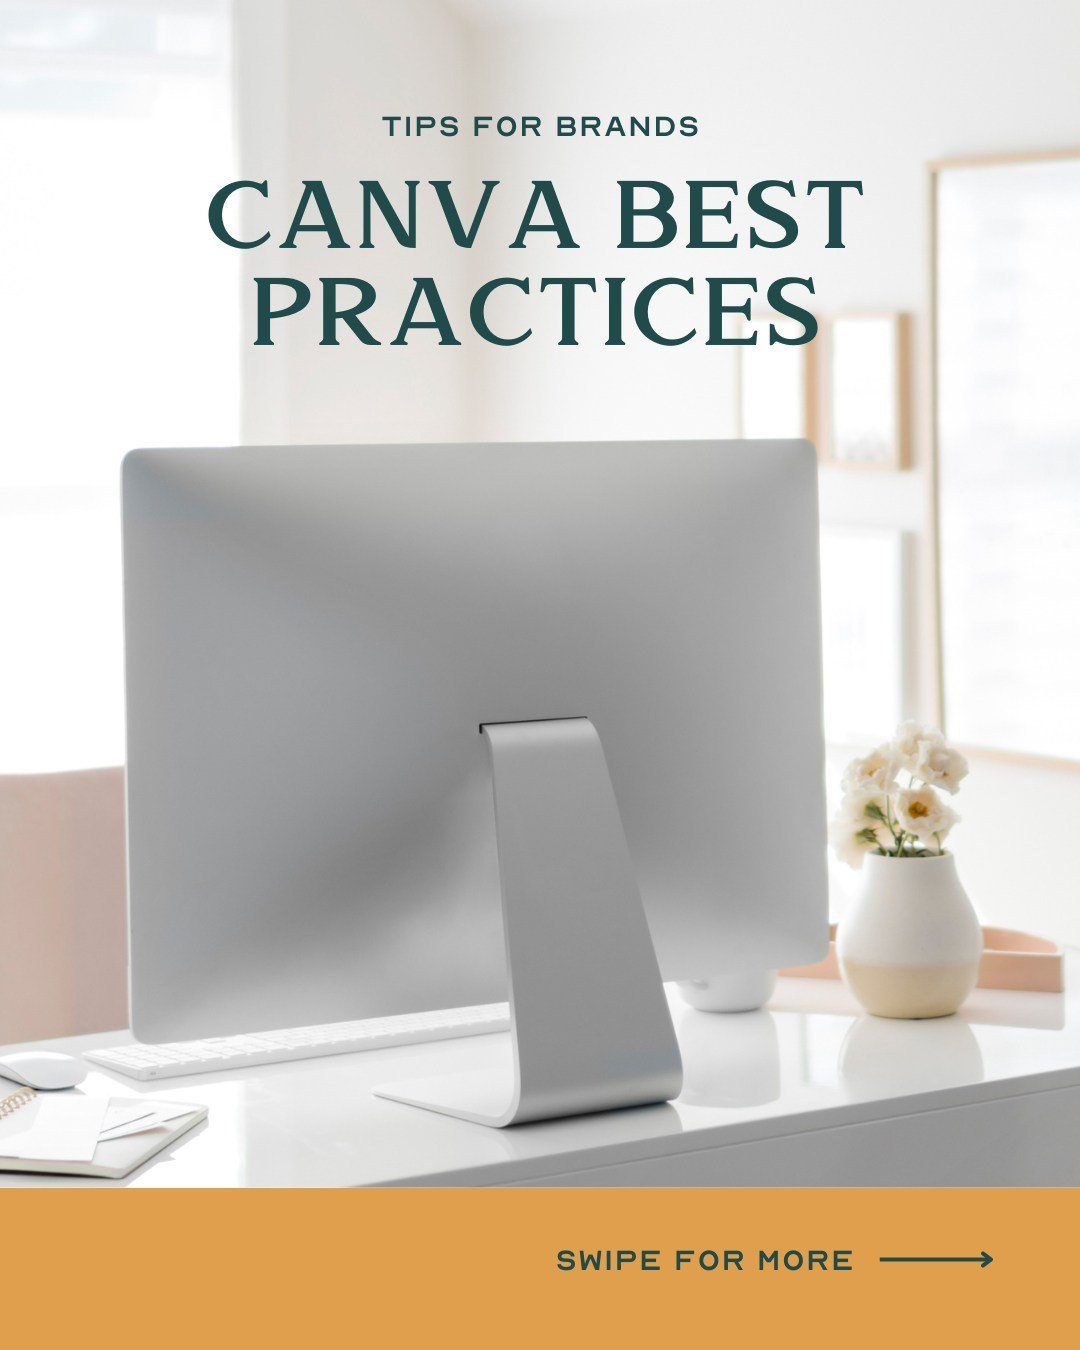 Canva is a useful tool that makes creating simple designs and templates a breeze for your brand. By following these best practices, you can effectively leverage Canva to create visually appealing and brand-consistent designs that resonate with your a